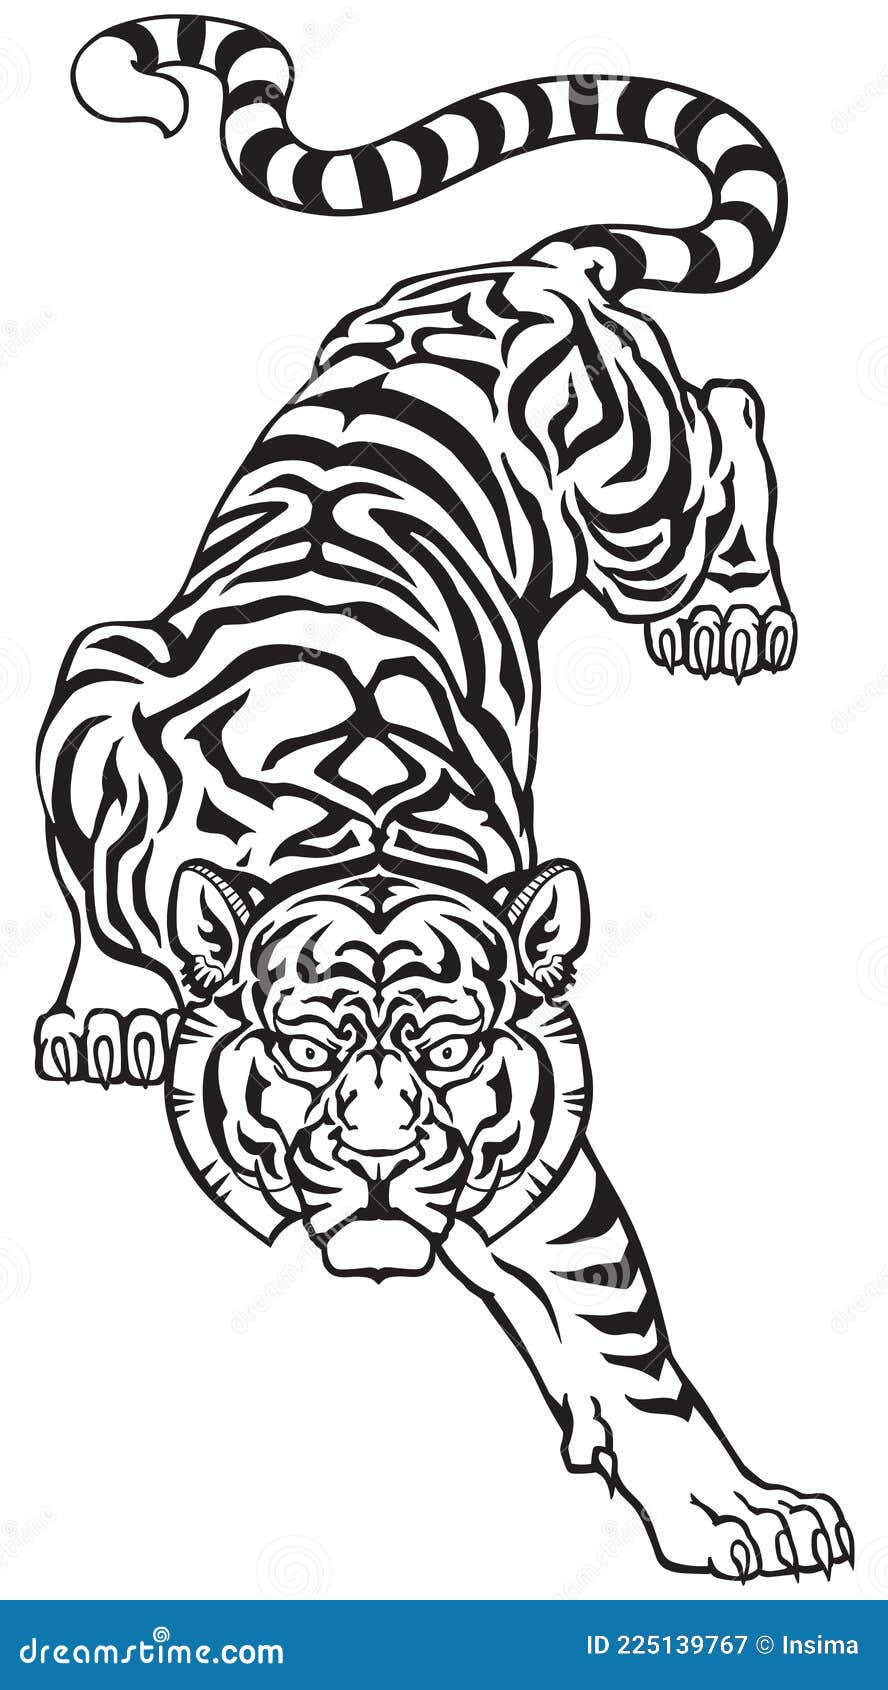 voorkoms black & white tiger tattoo - Price in India, Buy voorkoms black & white  tiger tattoo Online In India, Reviews, Ratings & Features | Flipkart.com